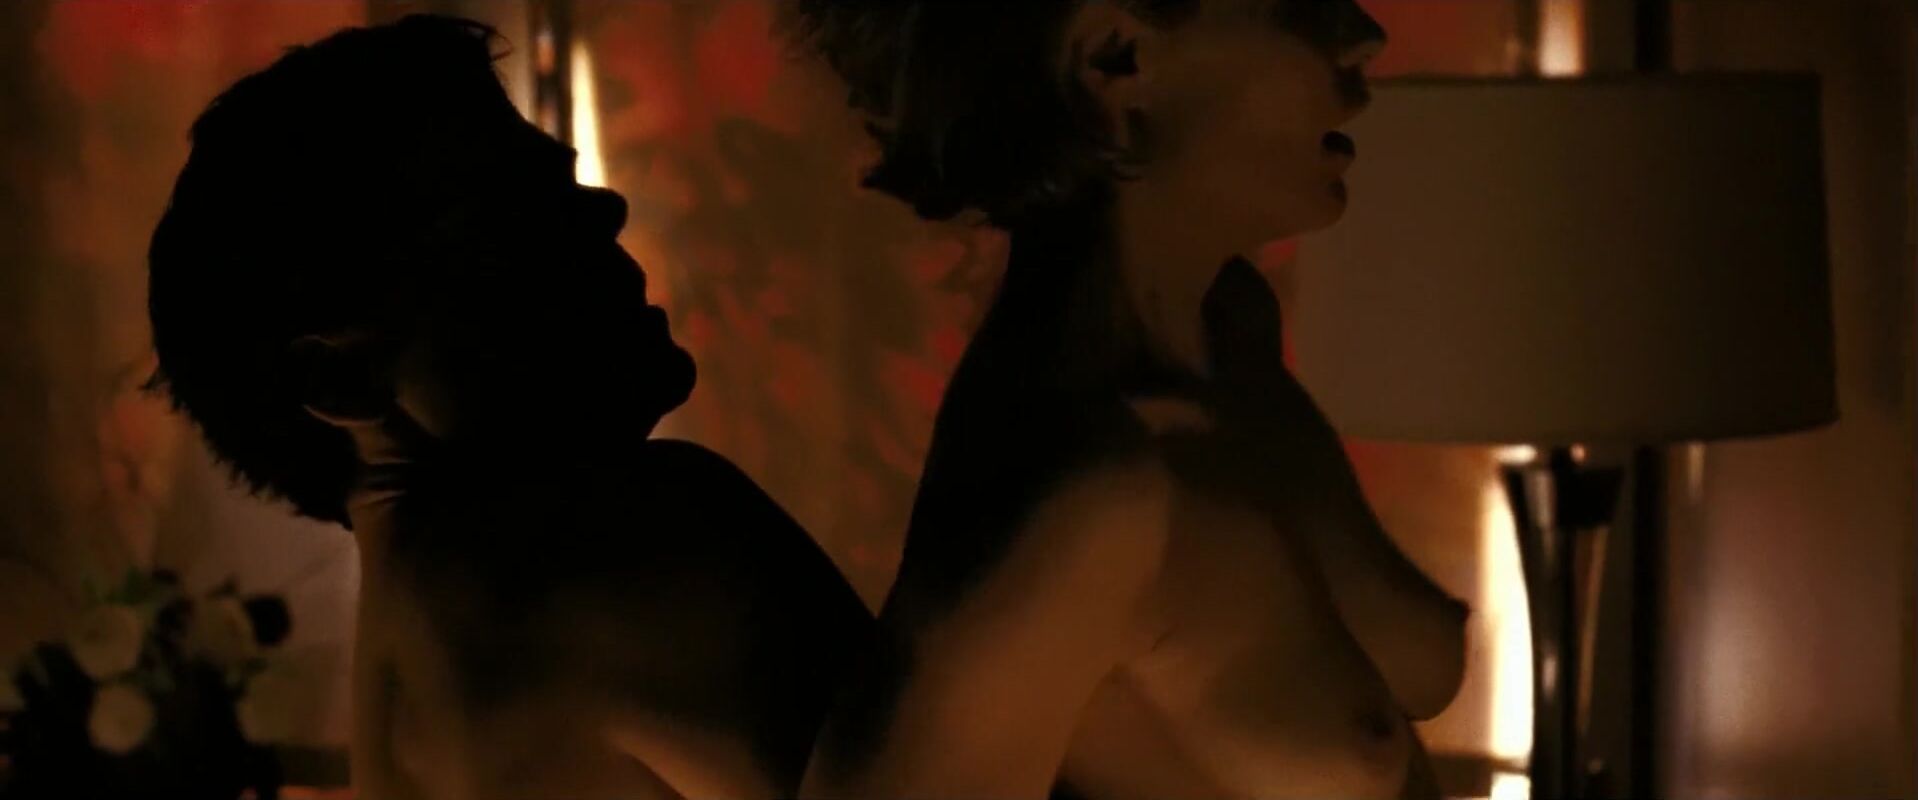 Clothed Sex Feast of Love is story of Radha Mitchell and Alexa Davalos nude being banged many times Sucking Dicks